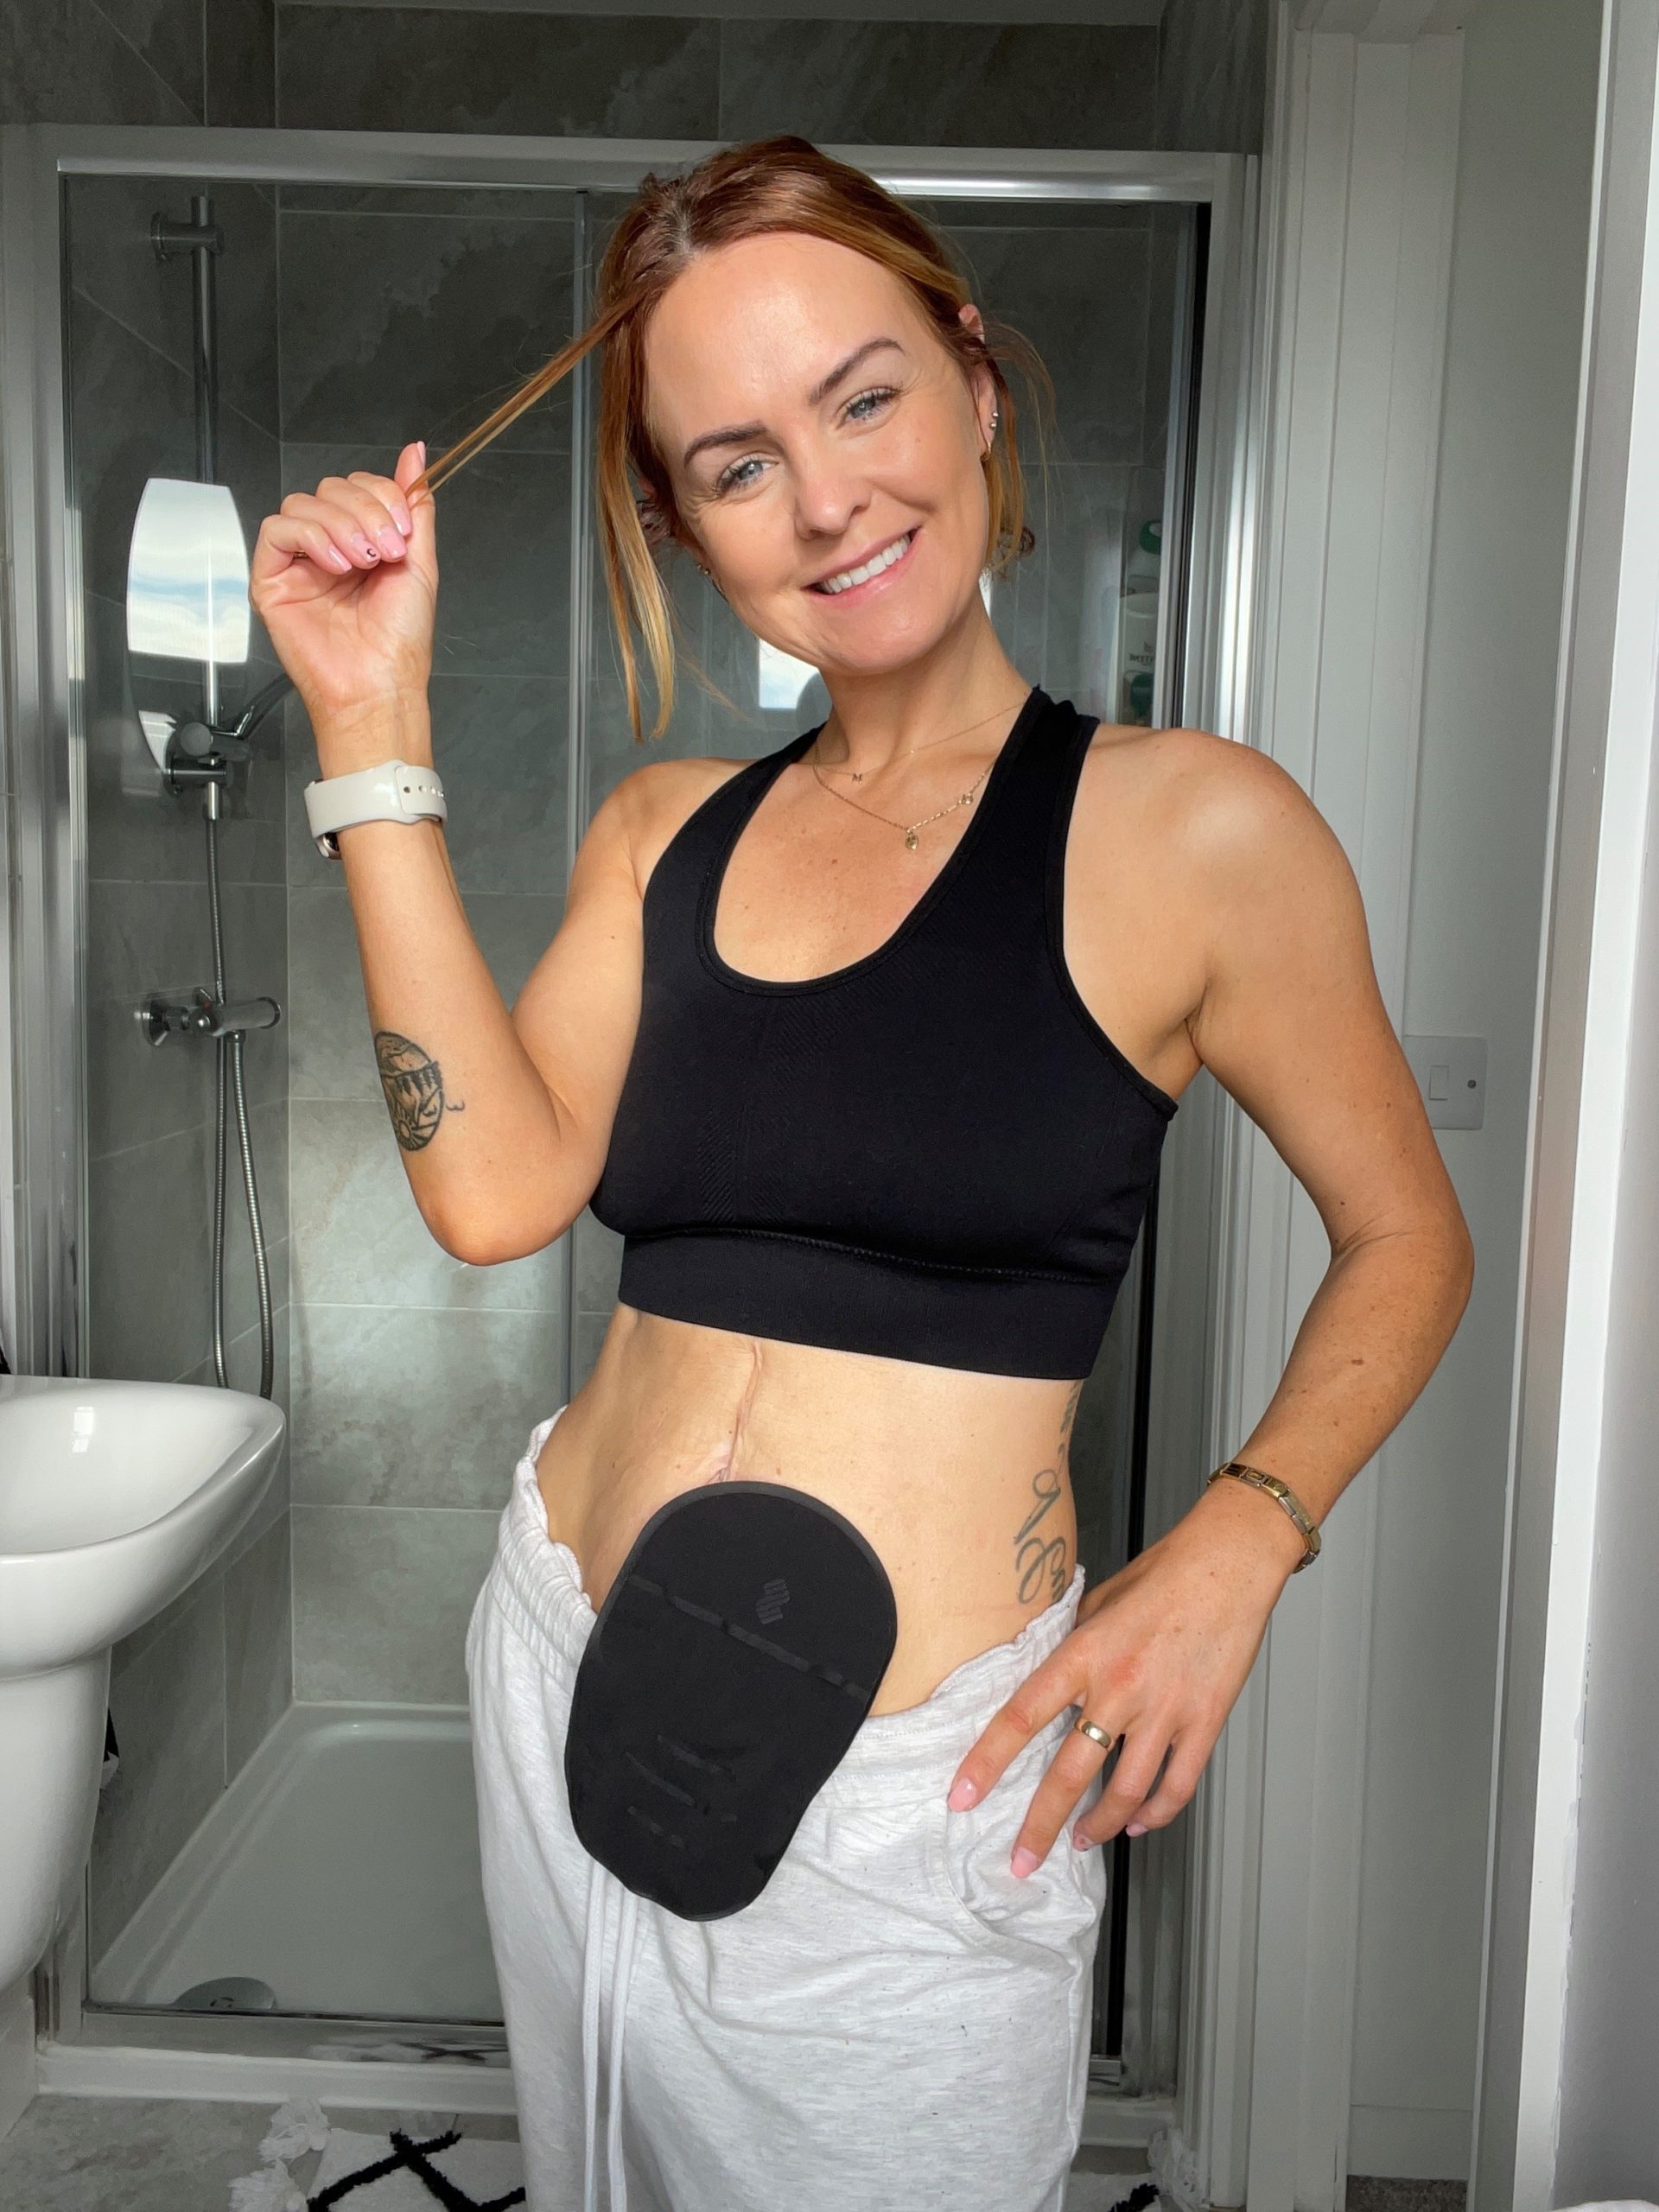 Importance of raising stoma awareness for World Ostomy Day by